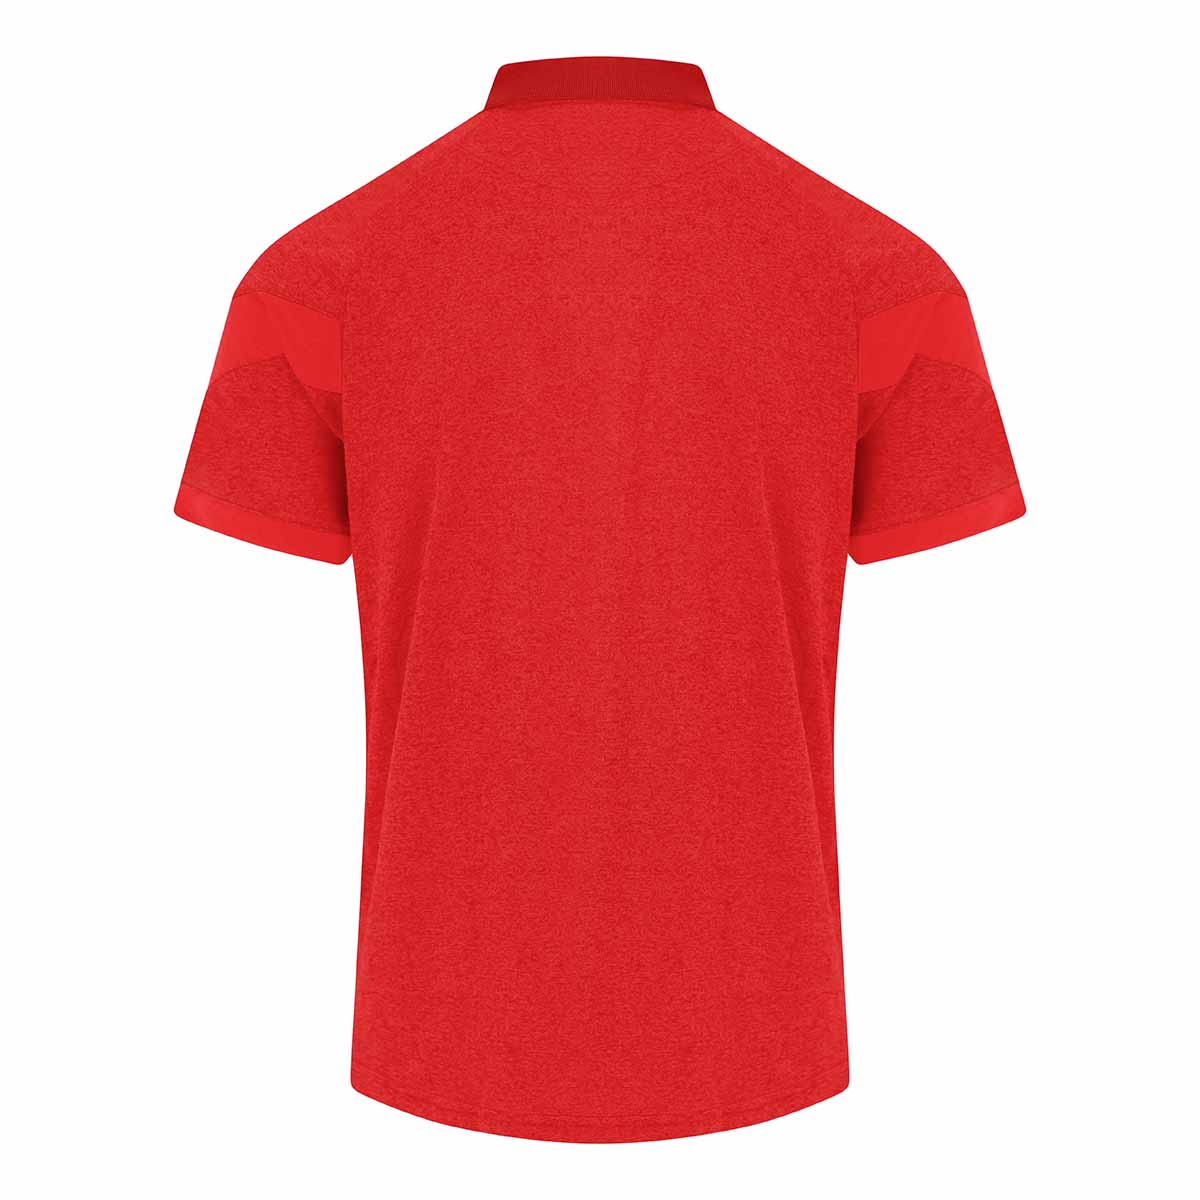 Mc Keever Caheragh Tadgh McCarthy's Core 22 Polo Top - Adult - Red